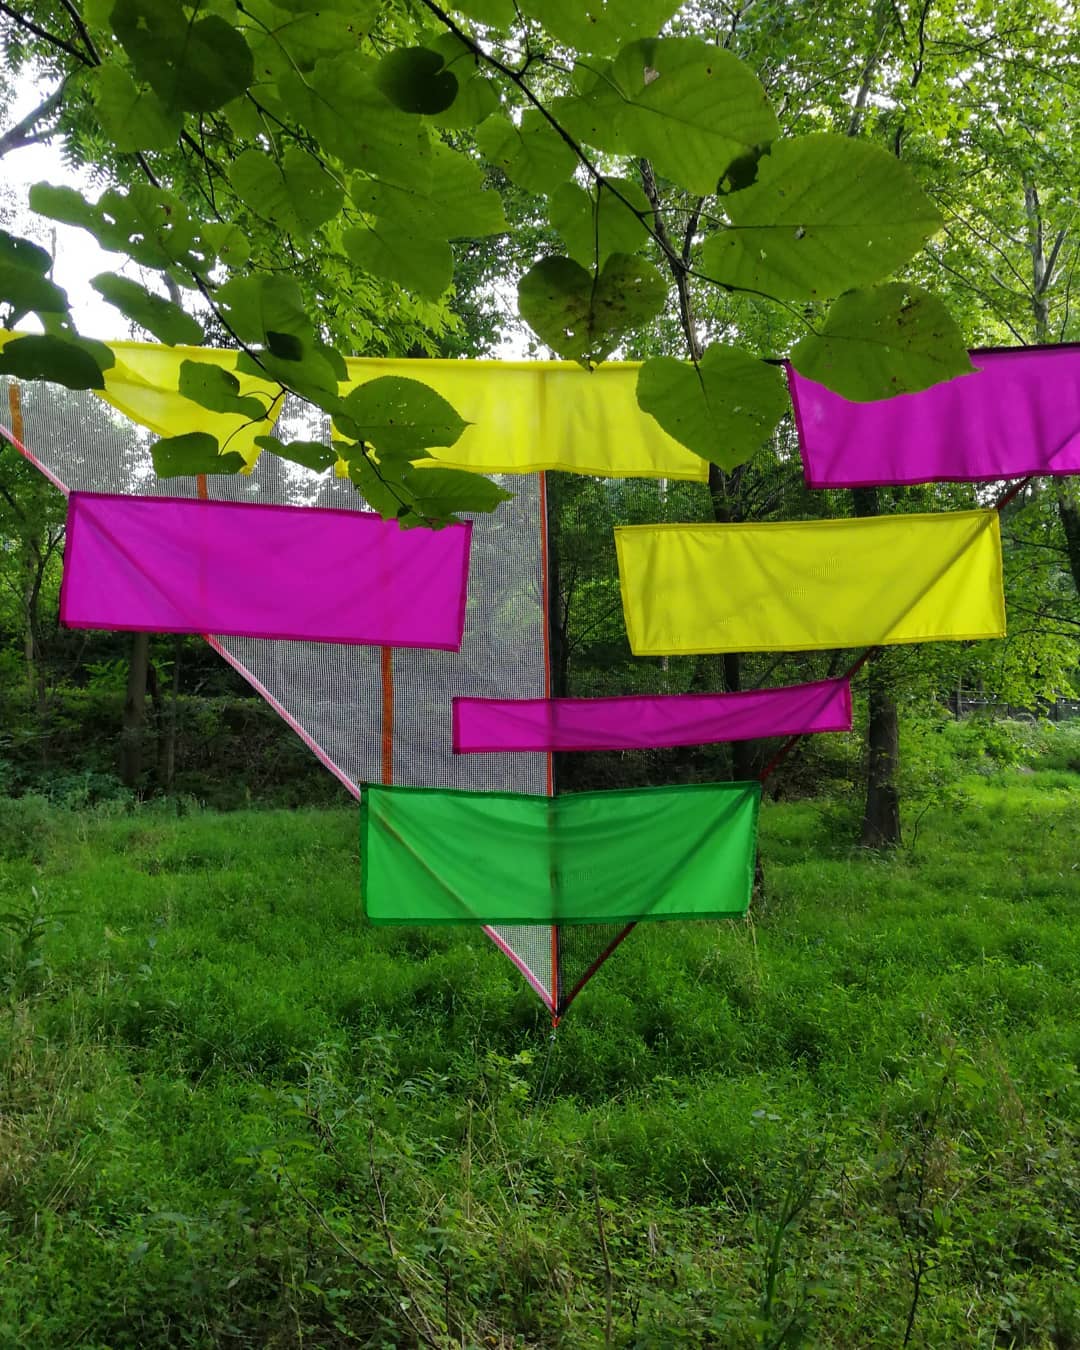 Backgrounded by grass and tree leaves, the outdoor art installation Site Lines on the Karl Stirner Arts Trail by sculptor Rachel Hayes features colorful construction mesh and nylon flag fabric.